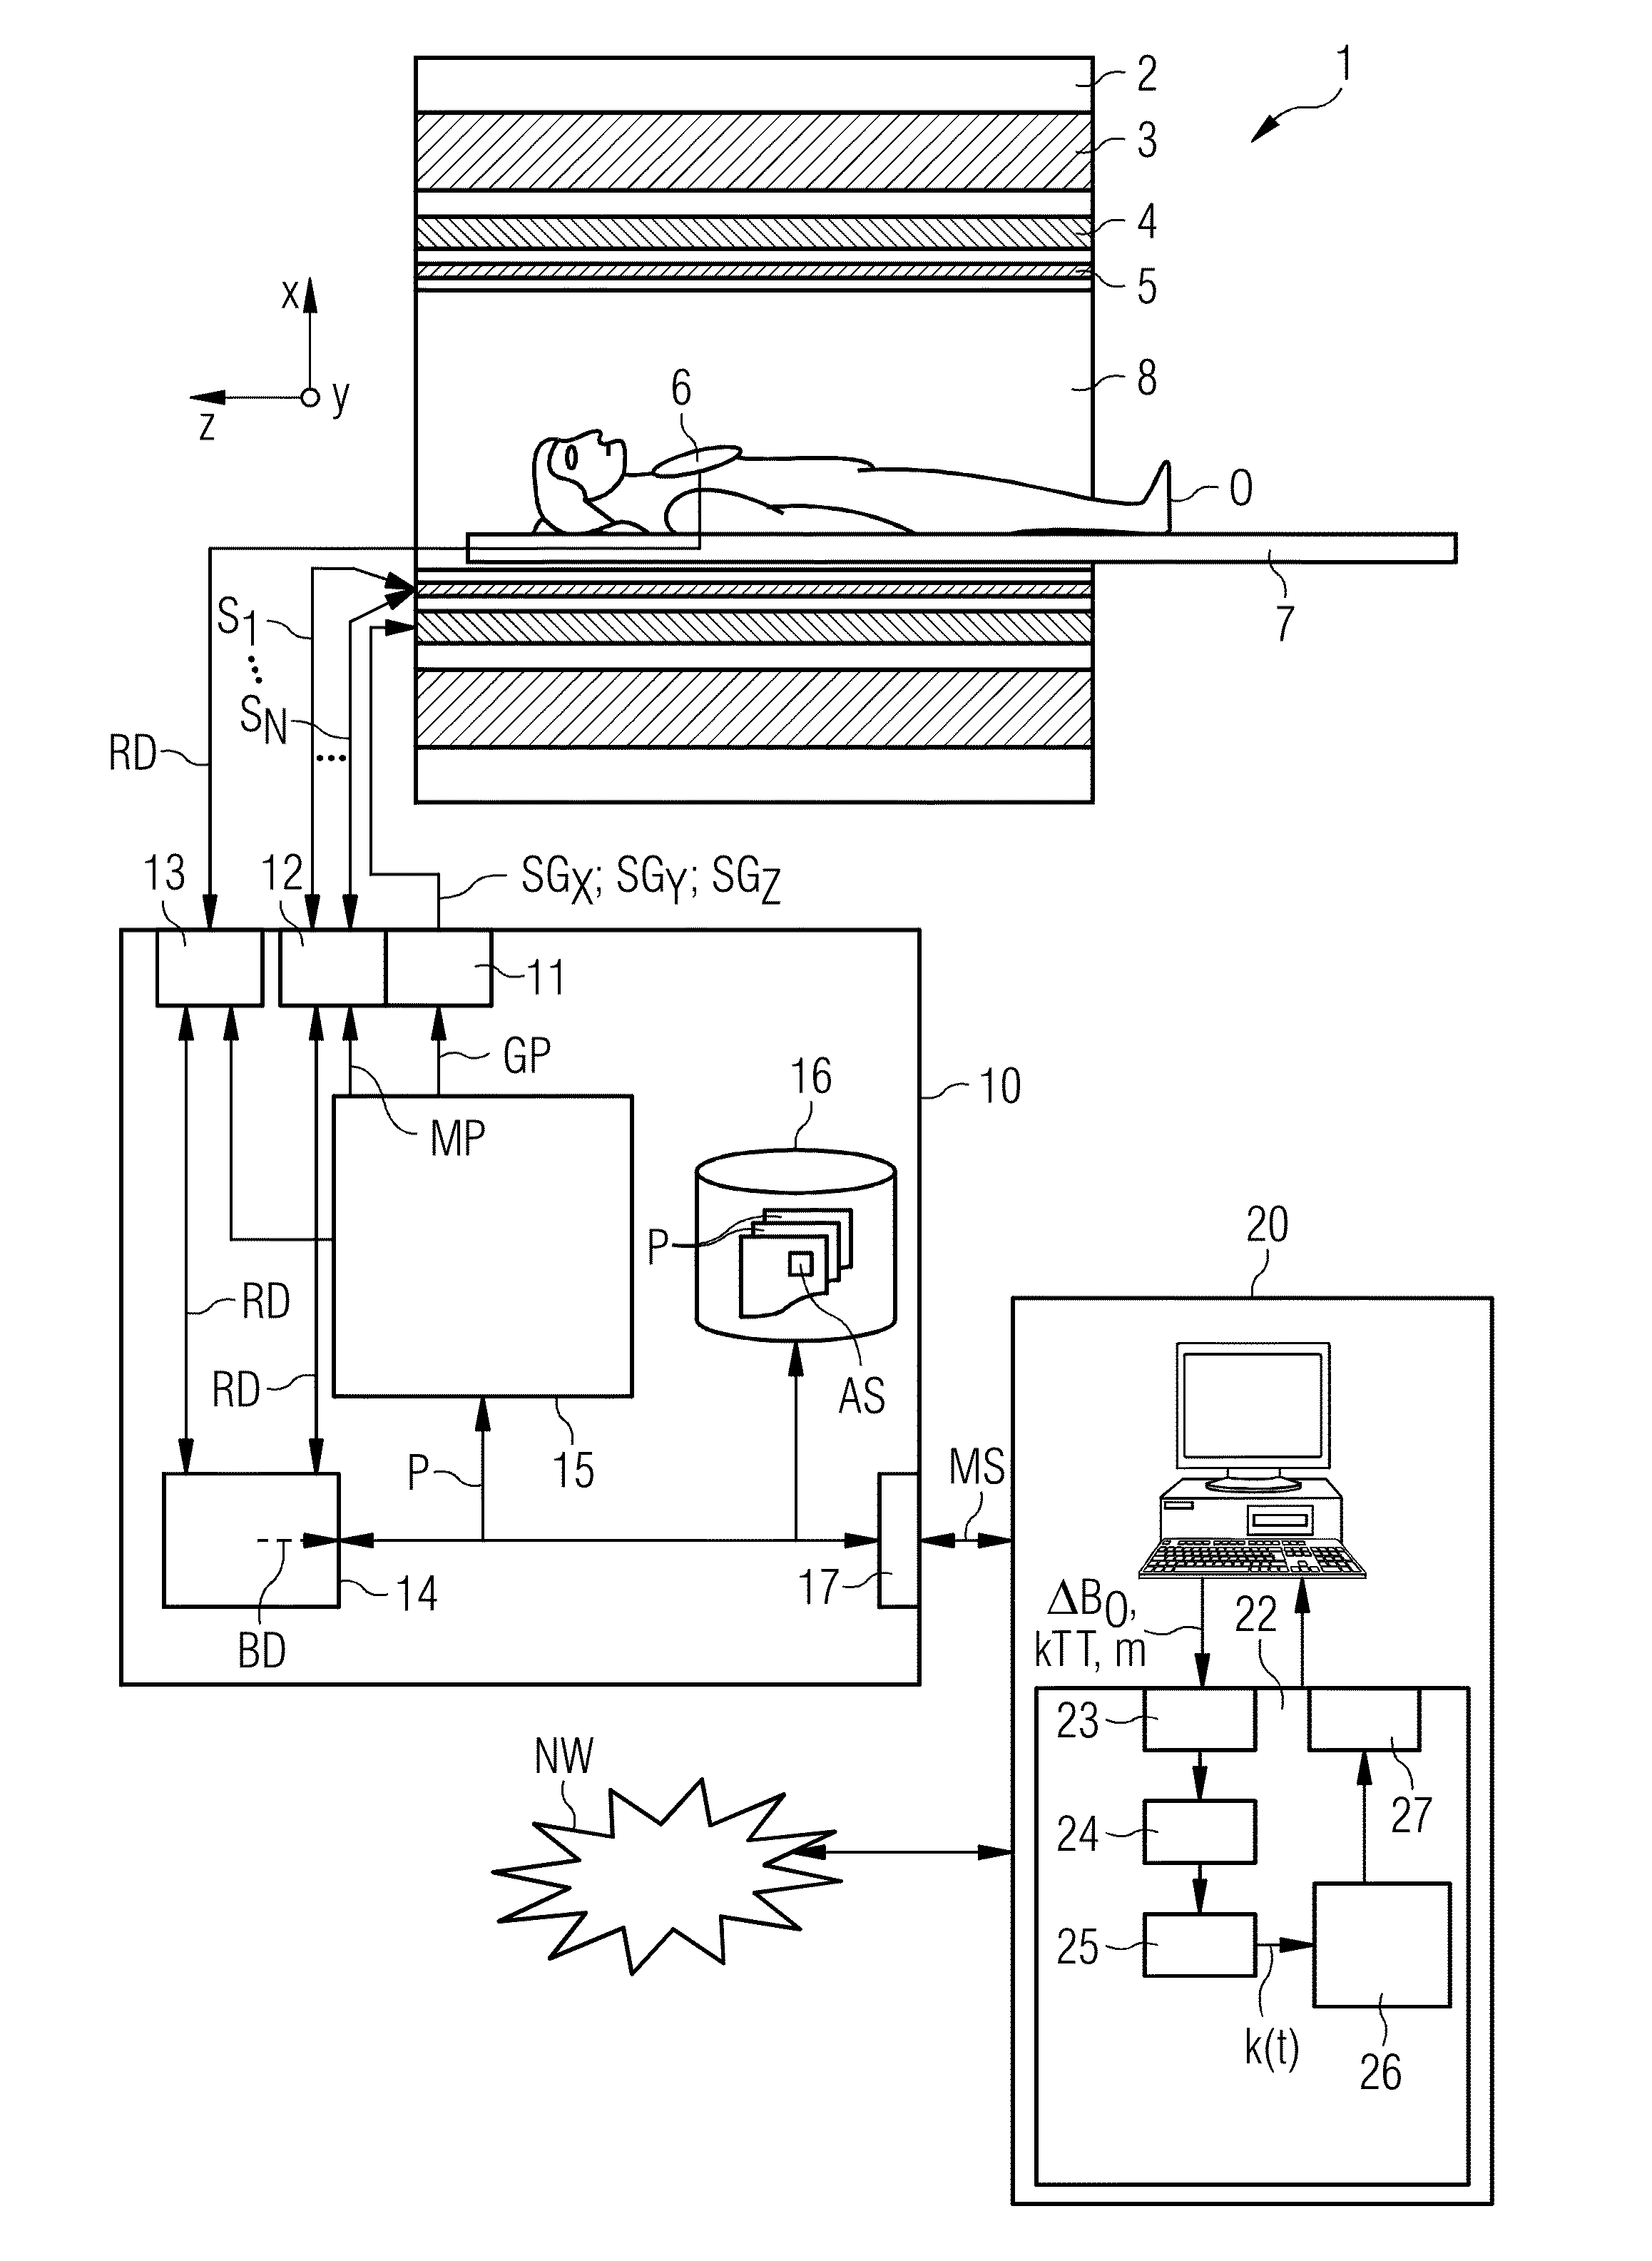 Determination of a Magnetic Resonance System Activation Sequence